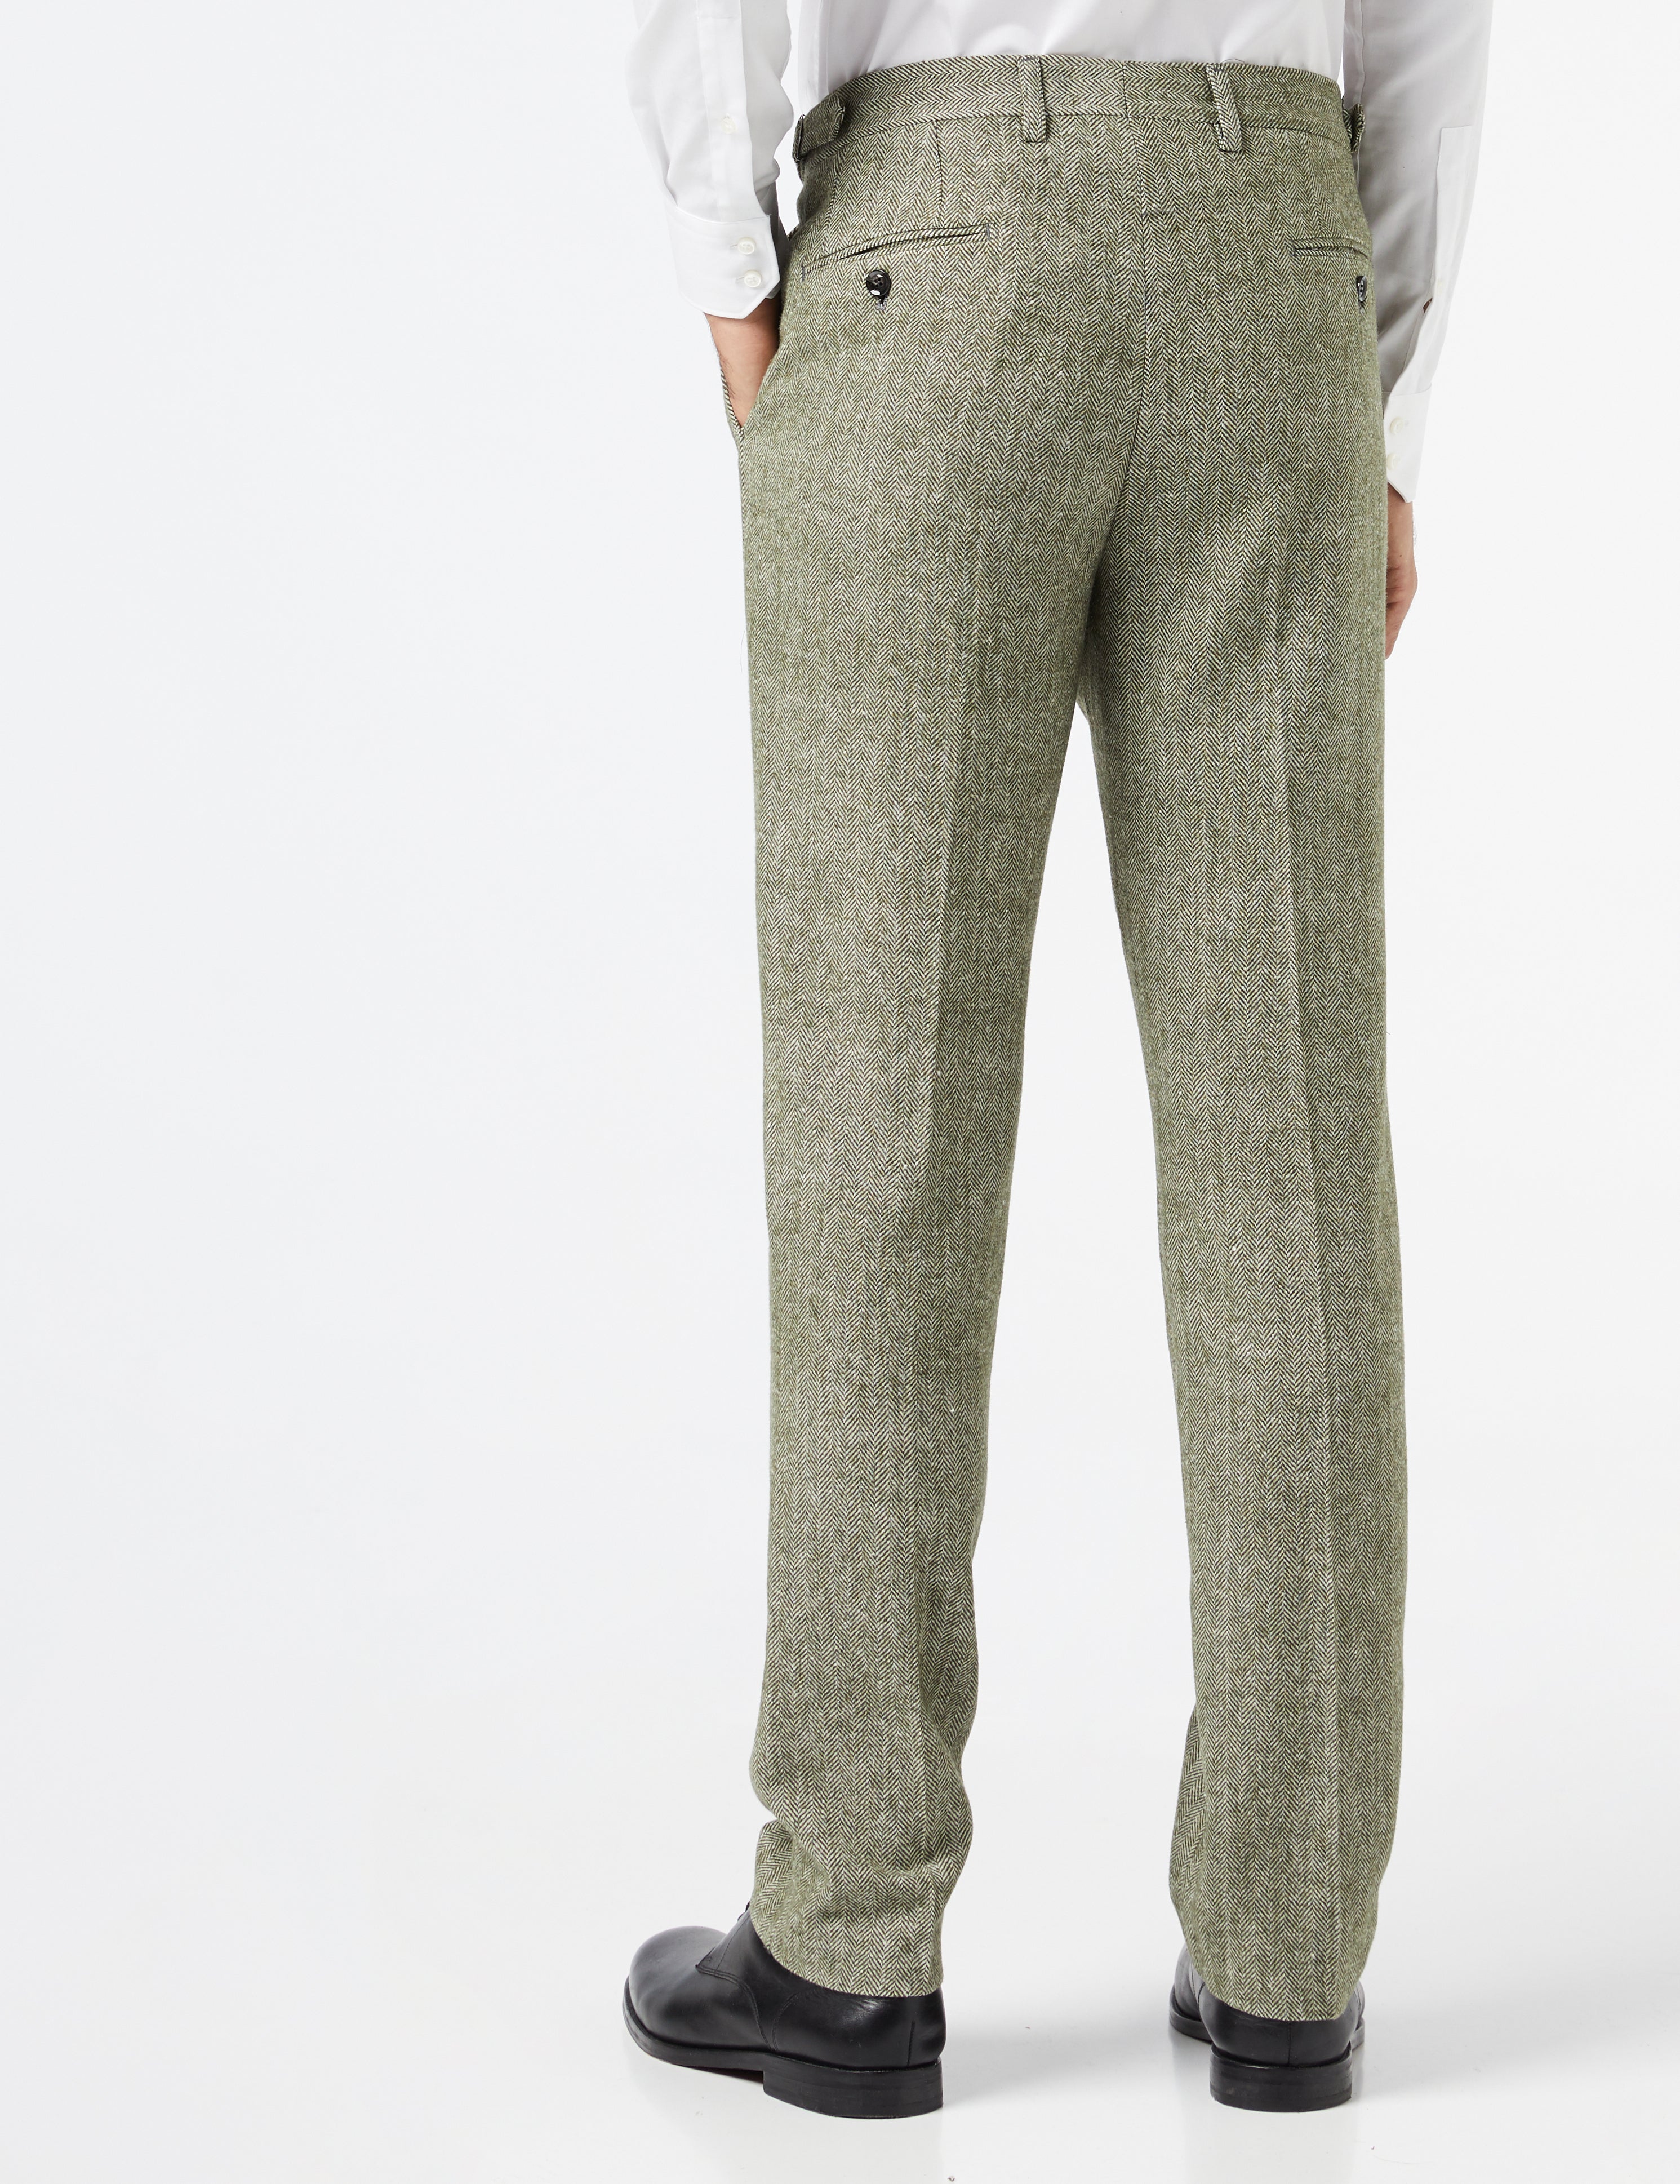 Martin - Mens Green Classic Tweed Tailored Fit Trouser